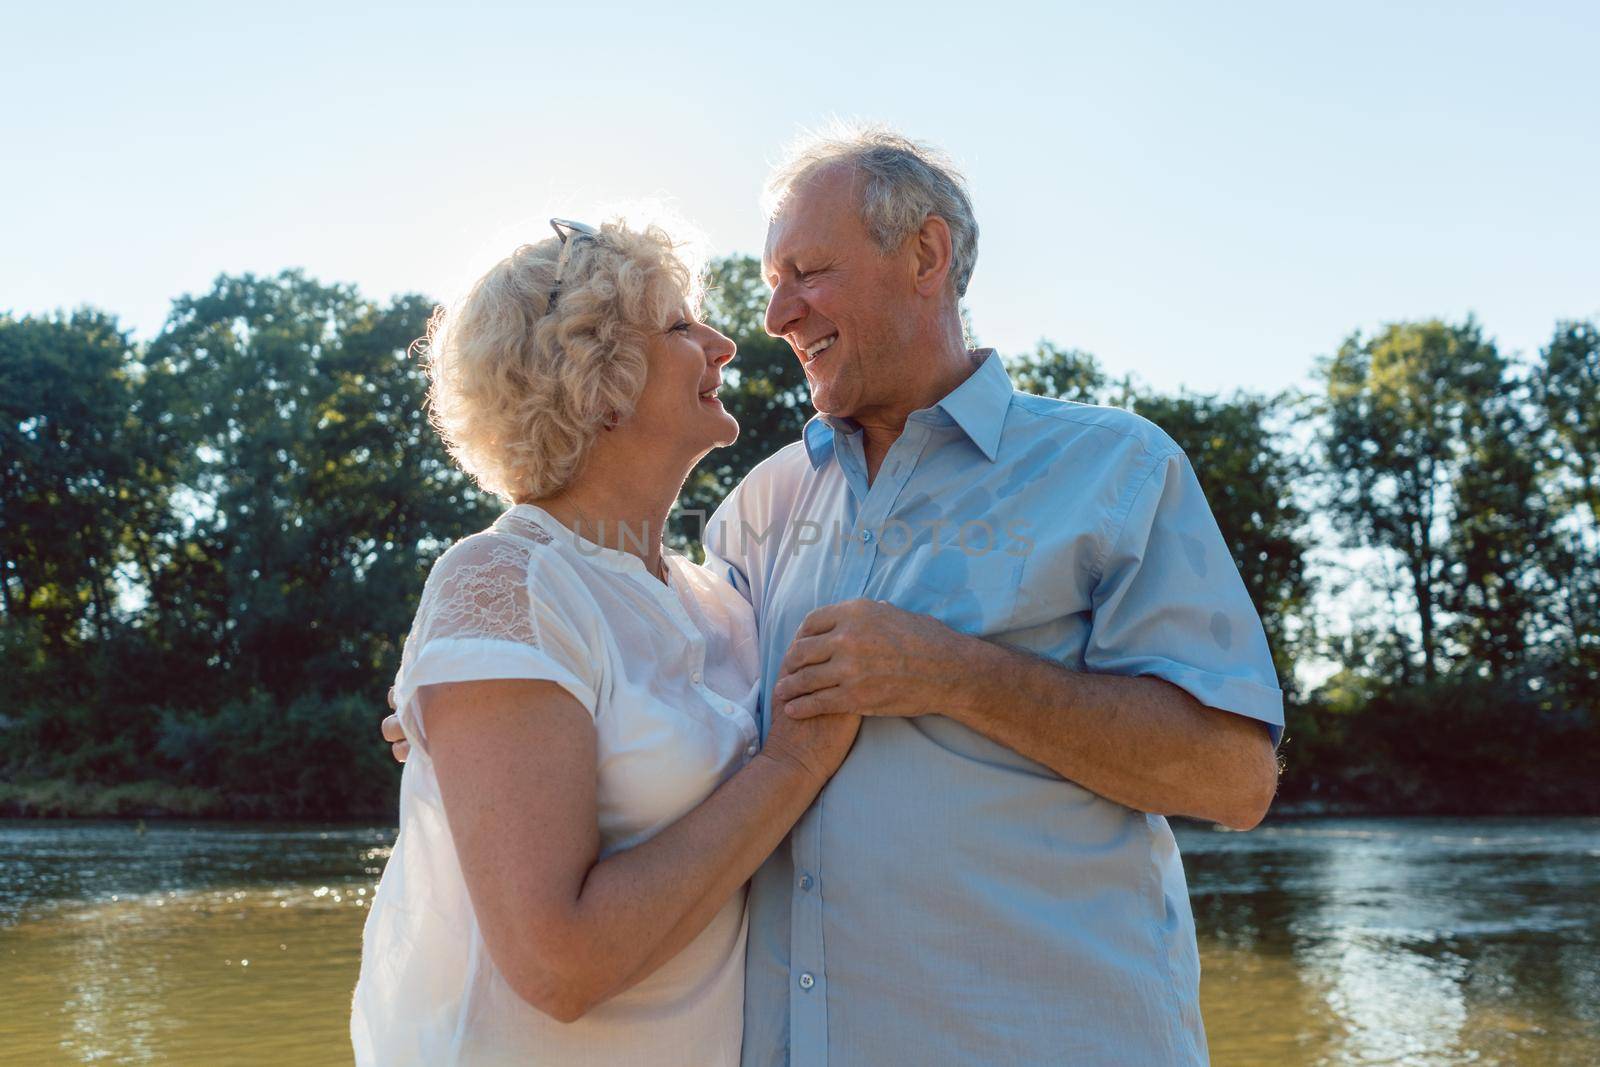 Low-angle side view portrait of a romantic senior couple in love enjoying a healthy and active lifestyle outdoors in summer